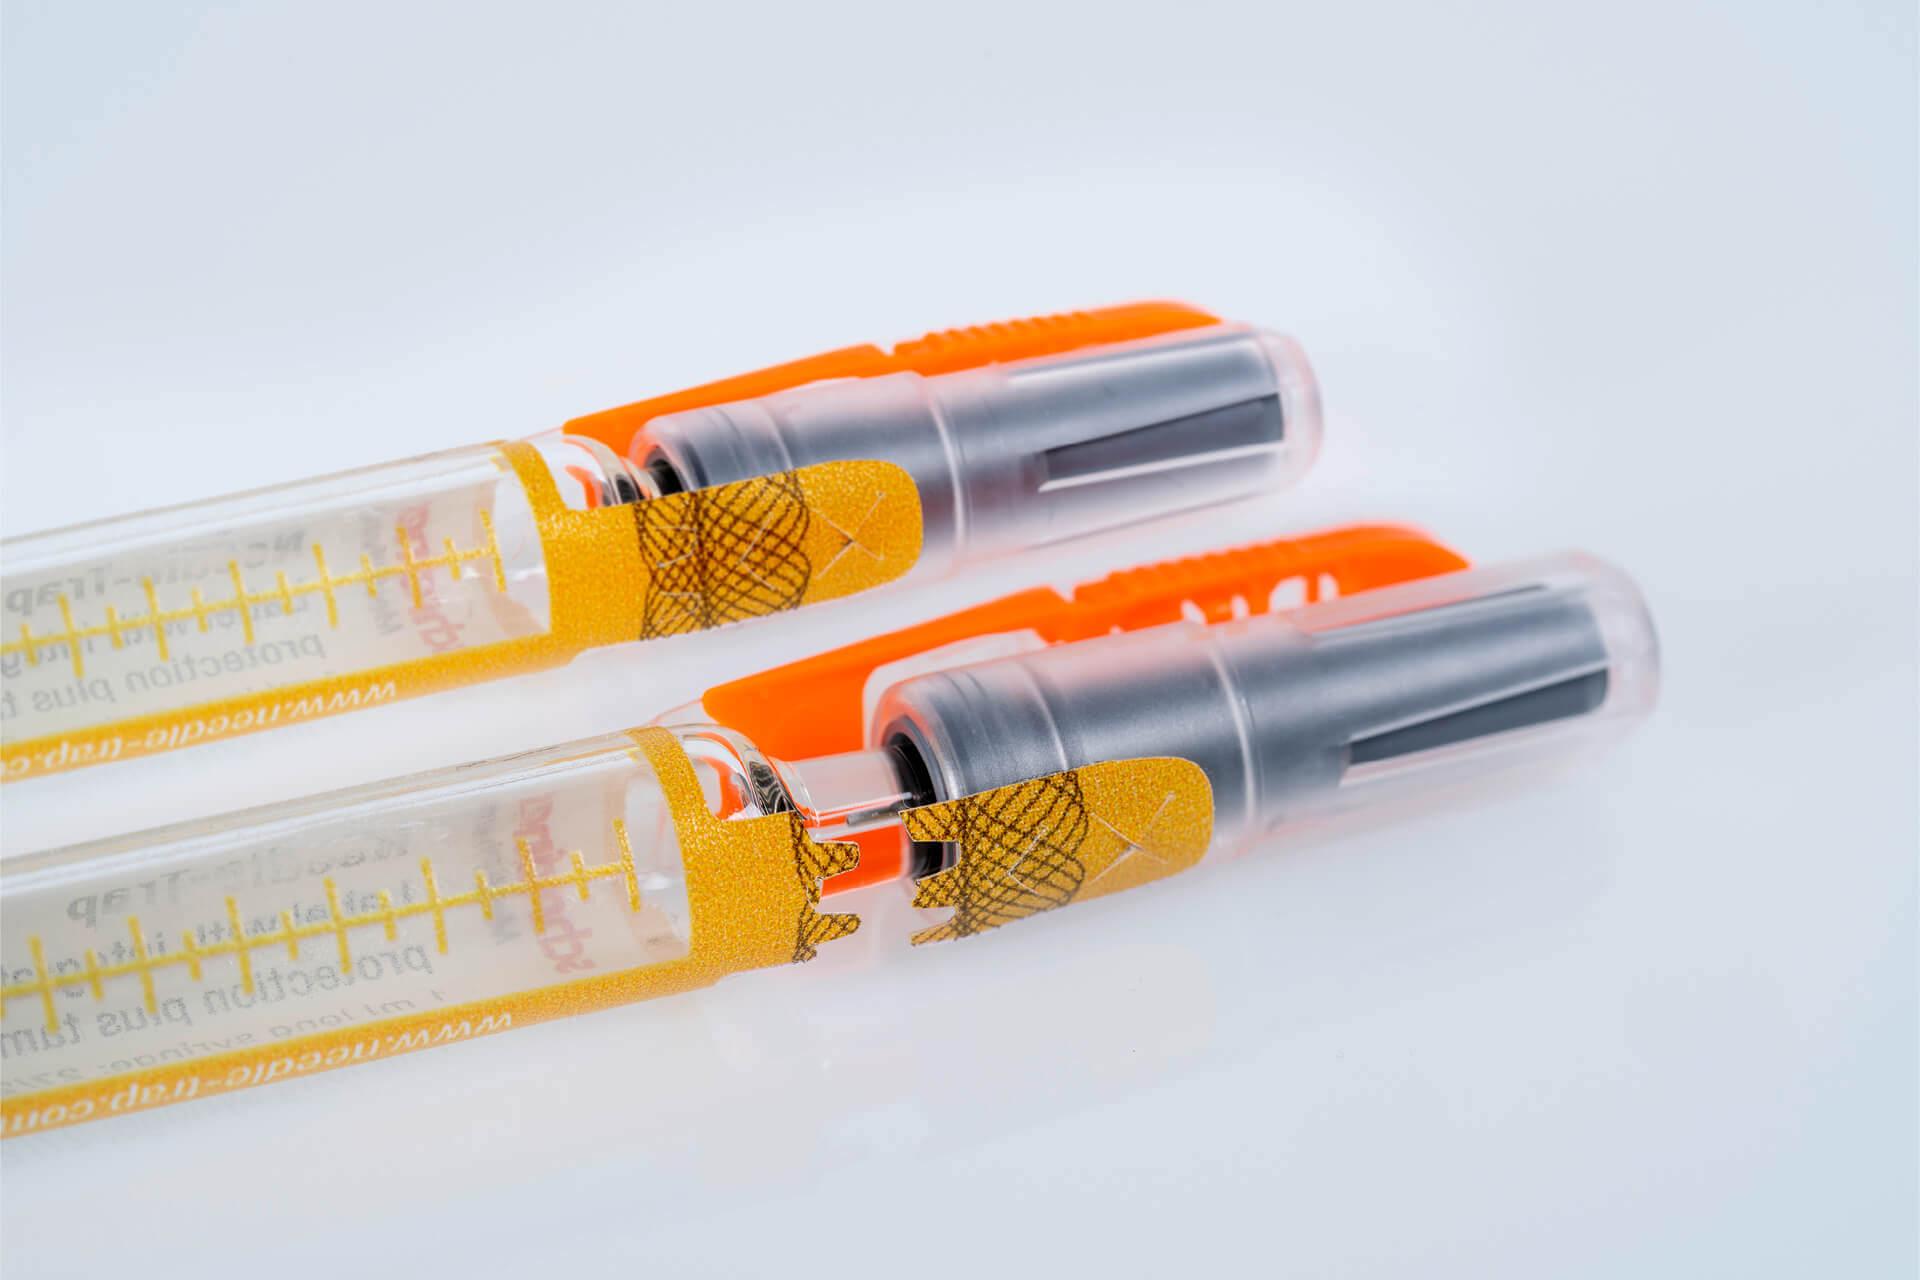 The security seal integrated in the needle protection system provides reliable first-opening indication of the pre-filled syringe, thus protecting its integrity.